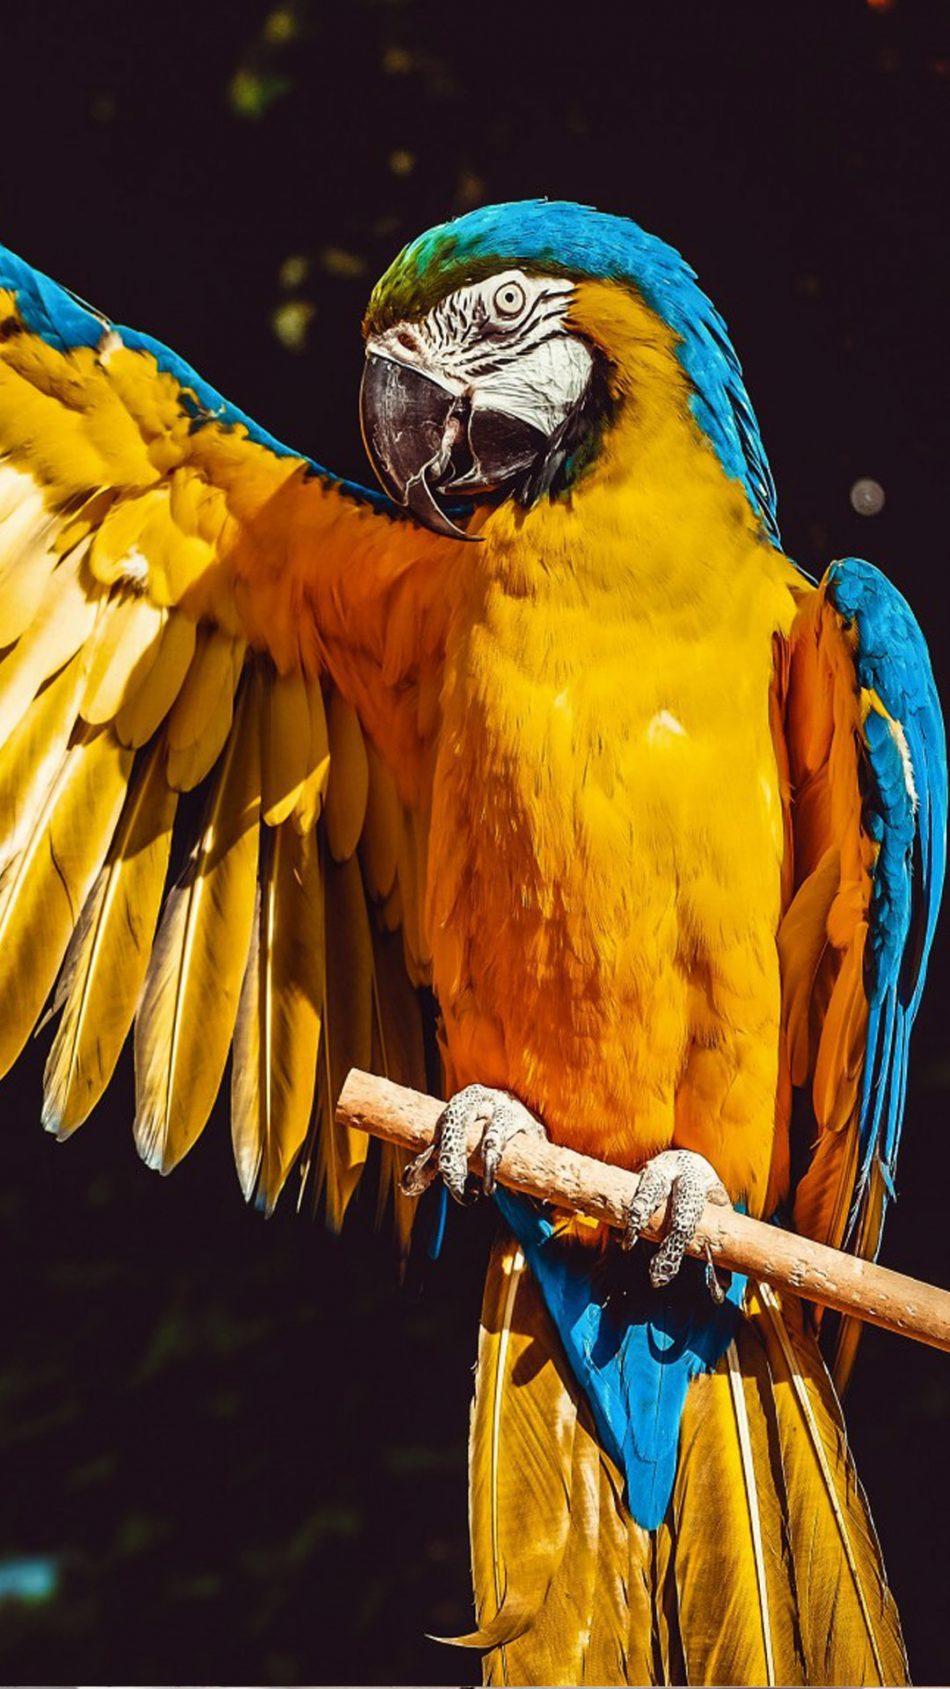 Mobile Colourful Bird Wallpapers - Wallpaper Cave